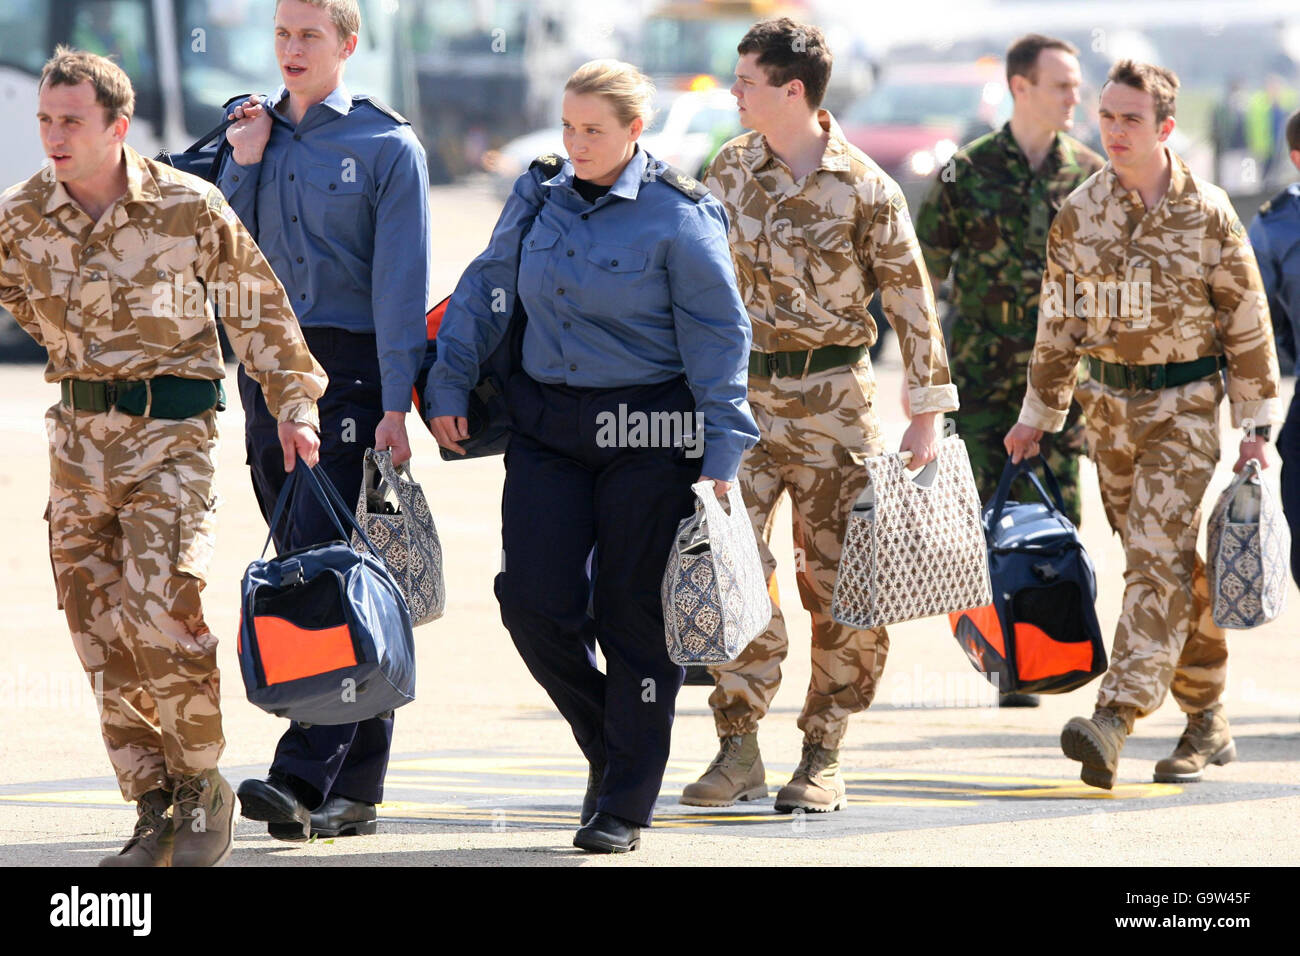 British service personnel (left to right) Gavin Cavendish, Simon Massey, Faye Turney, Joe Tindell and Dean Harris disembark a plane at Heathrow Airport after their return from Iran. Stock Photo